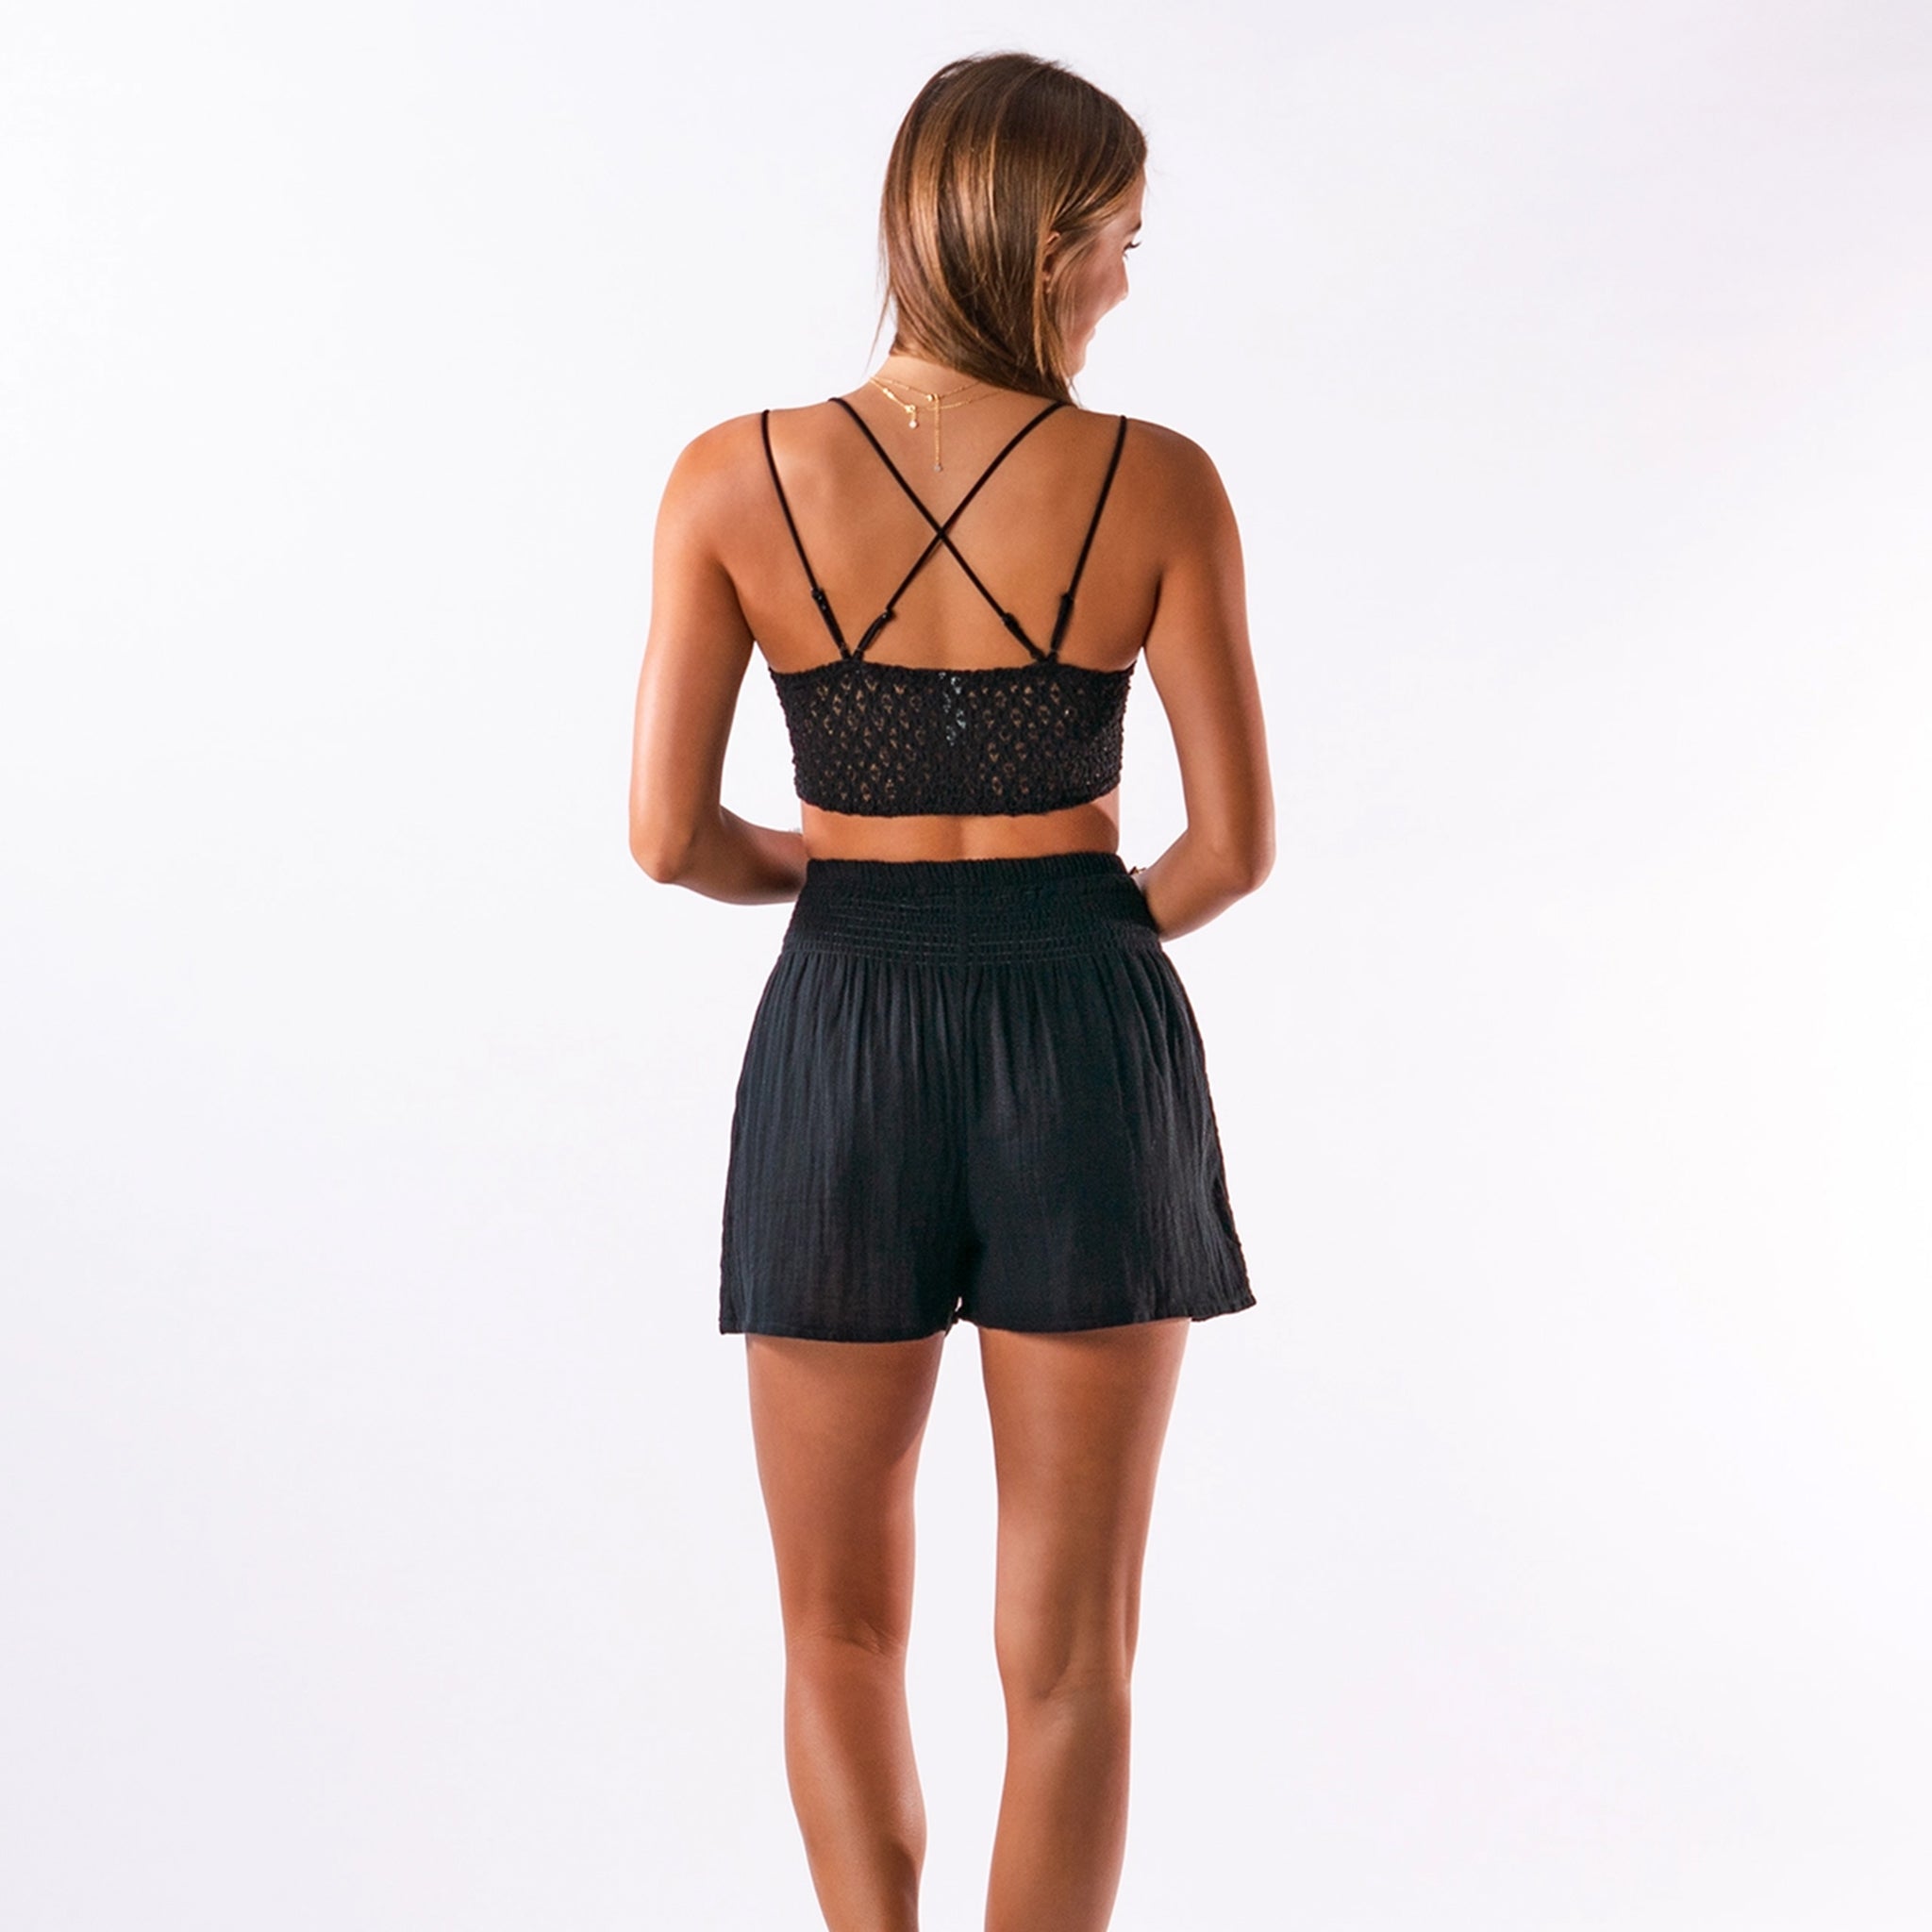 A model wearing black flowy cotton shorts with an elastic waistband.